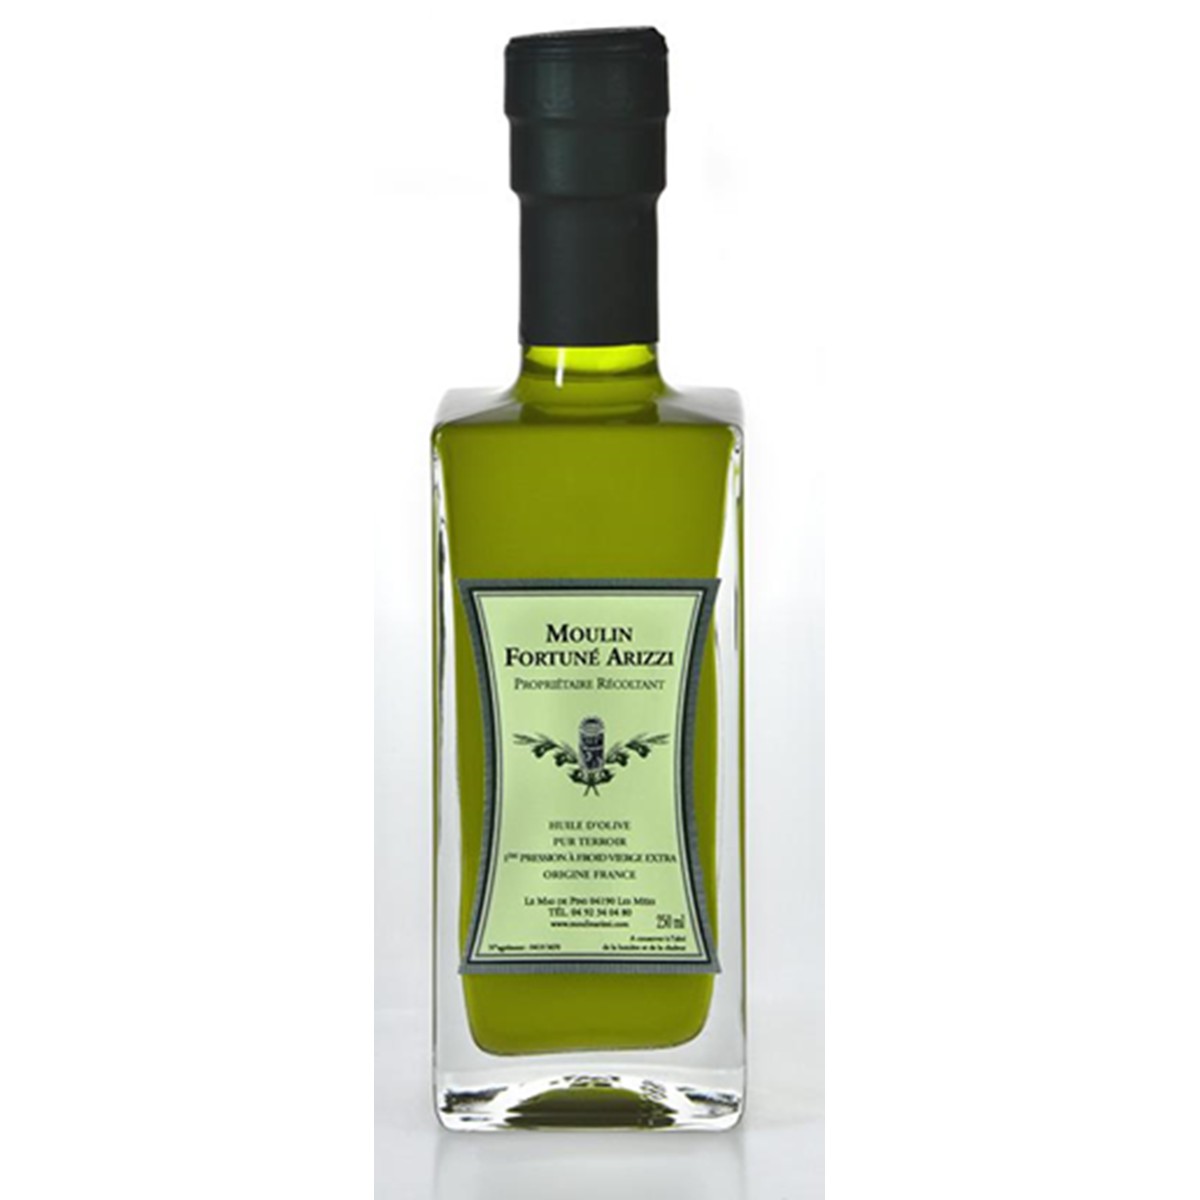   Huile d'Olive Vierge Extra Moulin Fortuné Arizzi 250ml  250ml